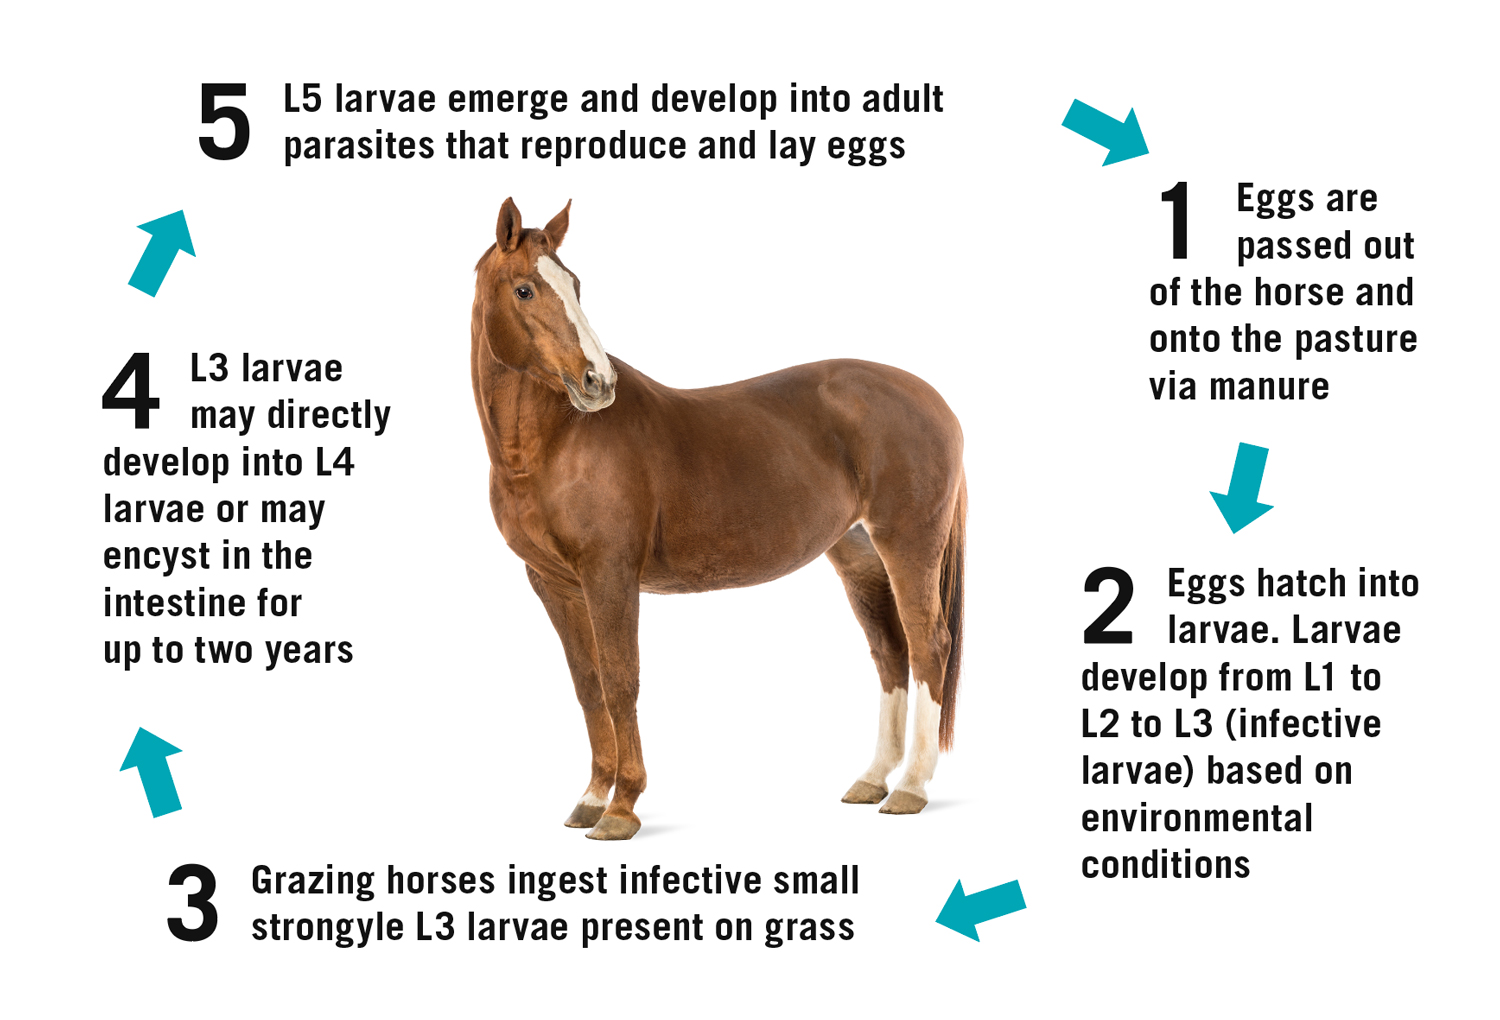 In stage 1, eggs are passed out of the horse and onto the pasture via manure. In step 2, eggs hatch into larvae. Larvae develop from L1 to L2 to L3 (infective larvae) based on environmental conditions. In step 3, grazing horses ingest infective small strongyle L3 larvae present on grass. In step 4, L3 larvae may directly develop into L4 larvae or may encyst in the intestine for up to 2 years. The final step is when L5 larvae emerge and develop into adult parasites that reproduce and lay eggs, at which point this cycle repeats.